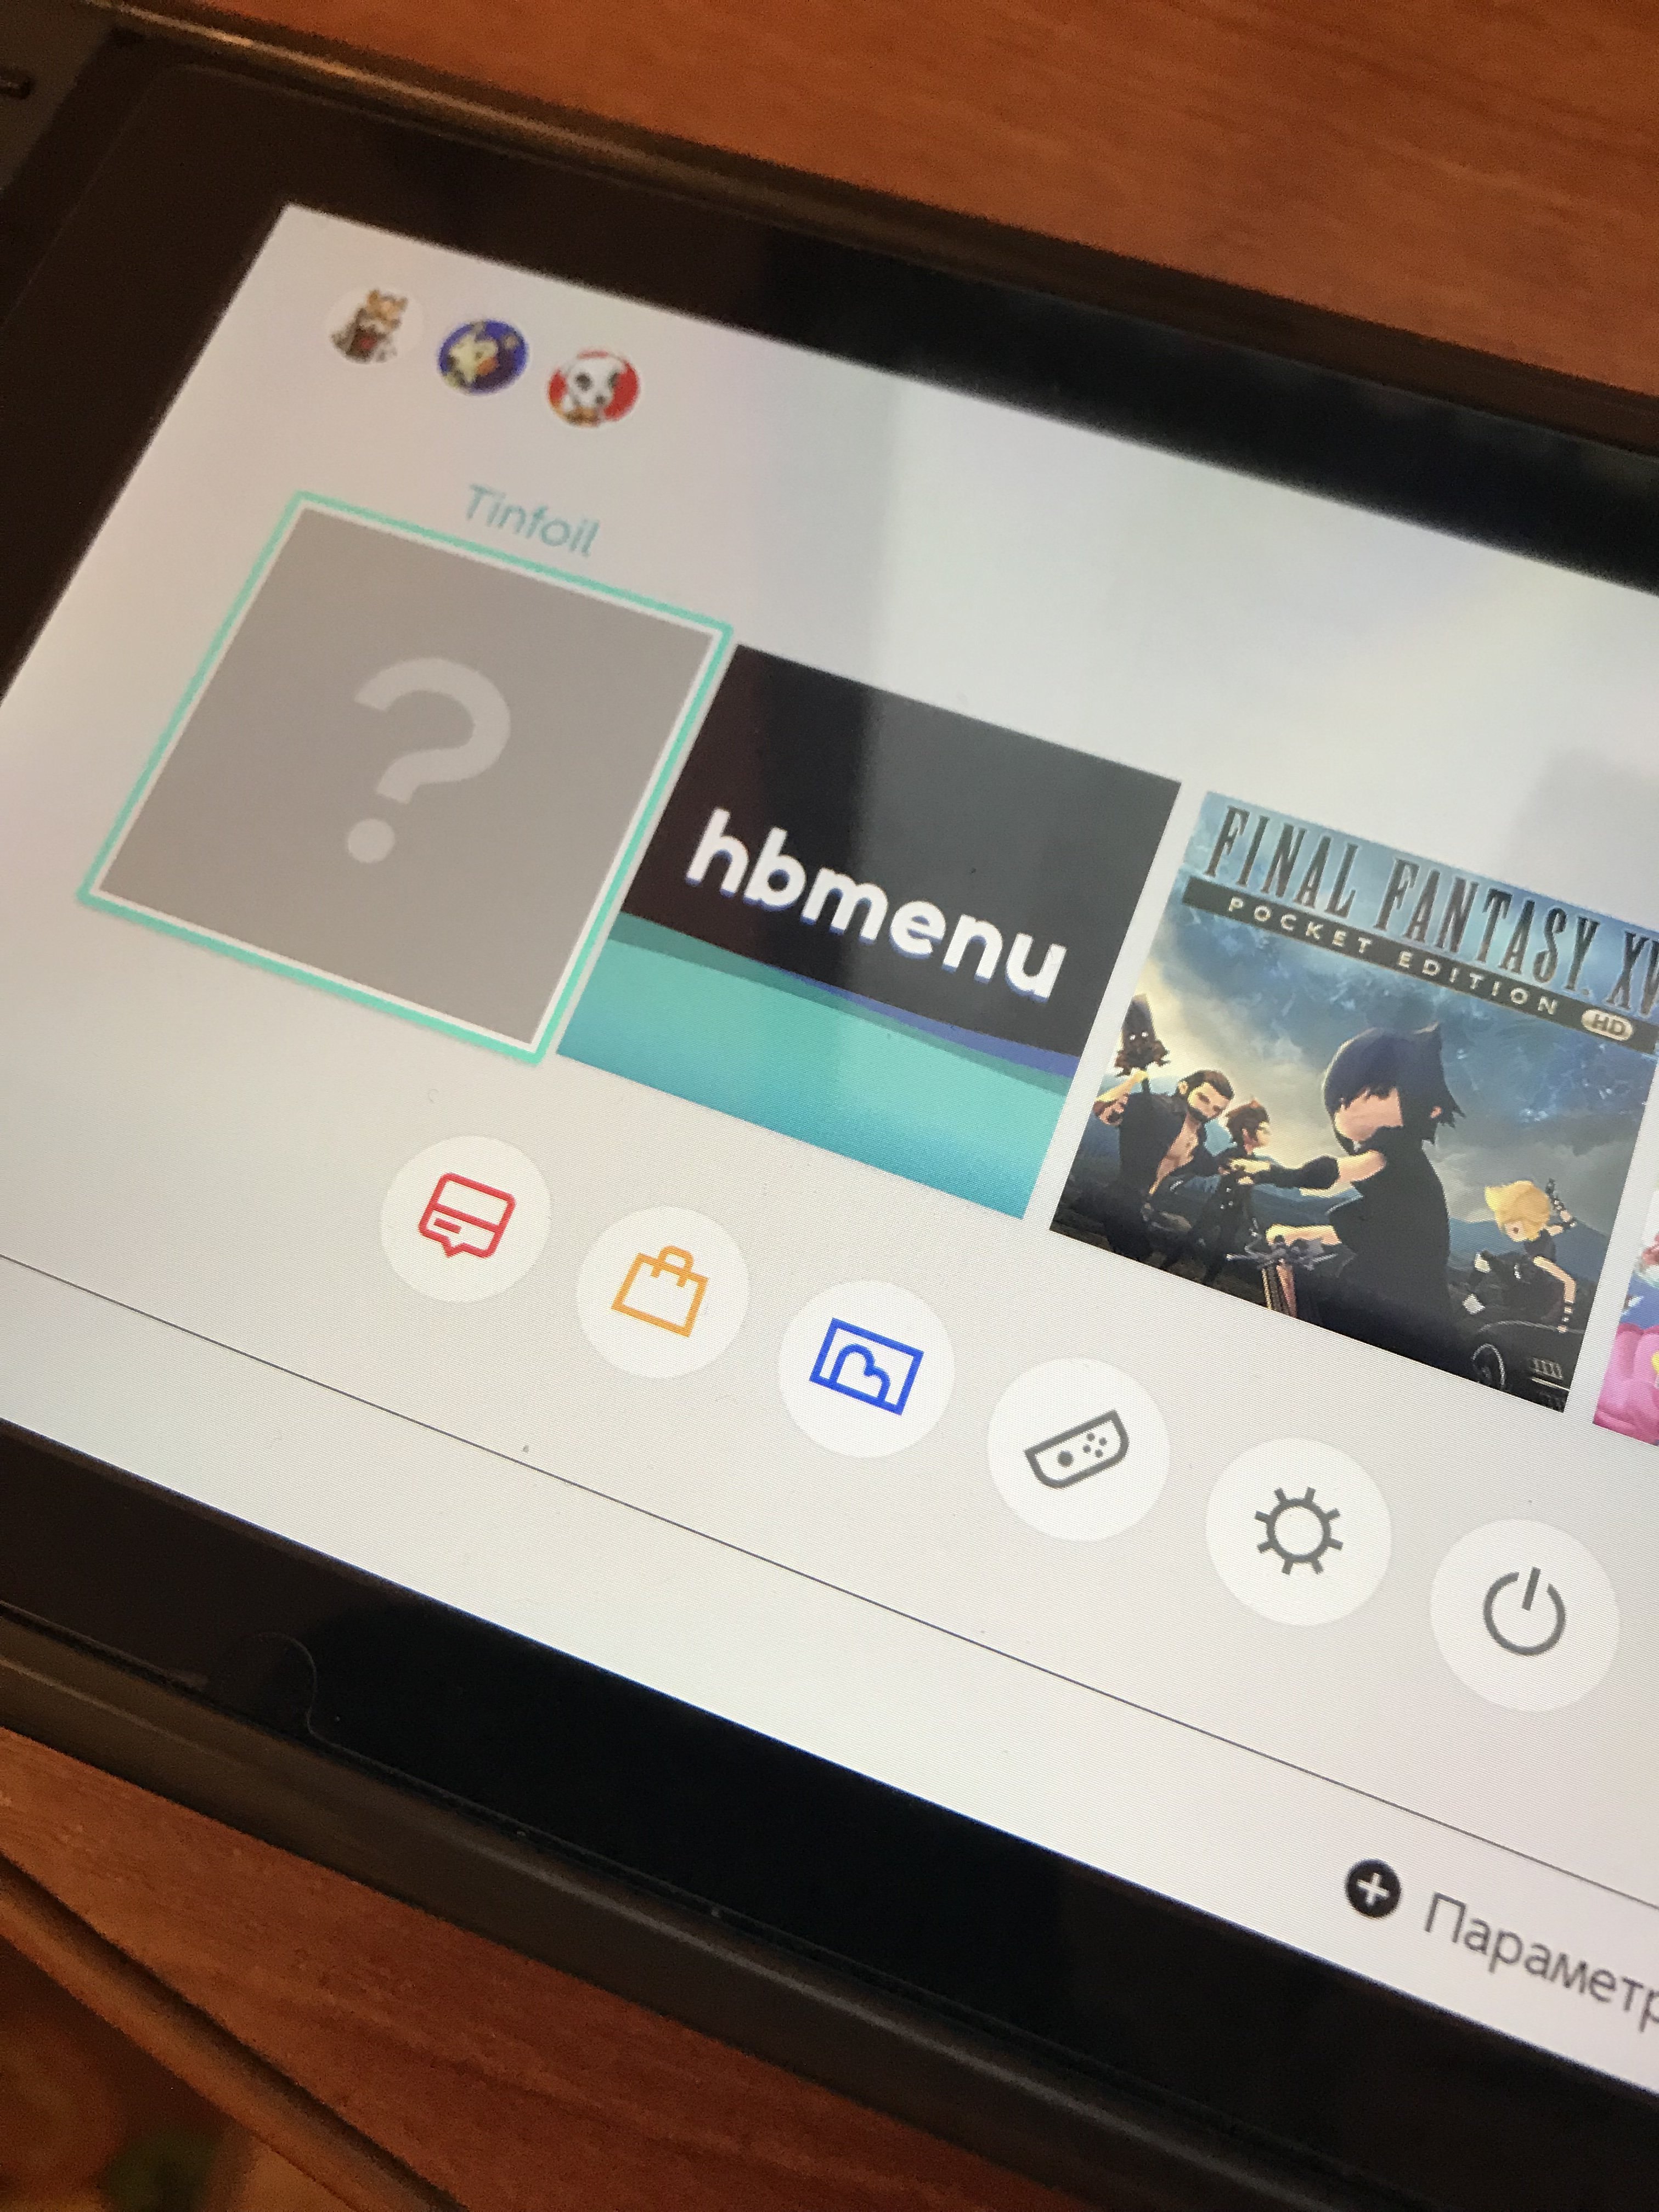 How to forward Retroarch roms right to the Nintendo Switch home screen -  Hackinformer